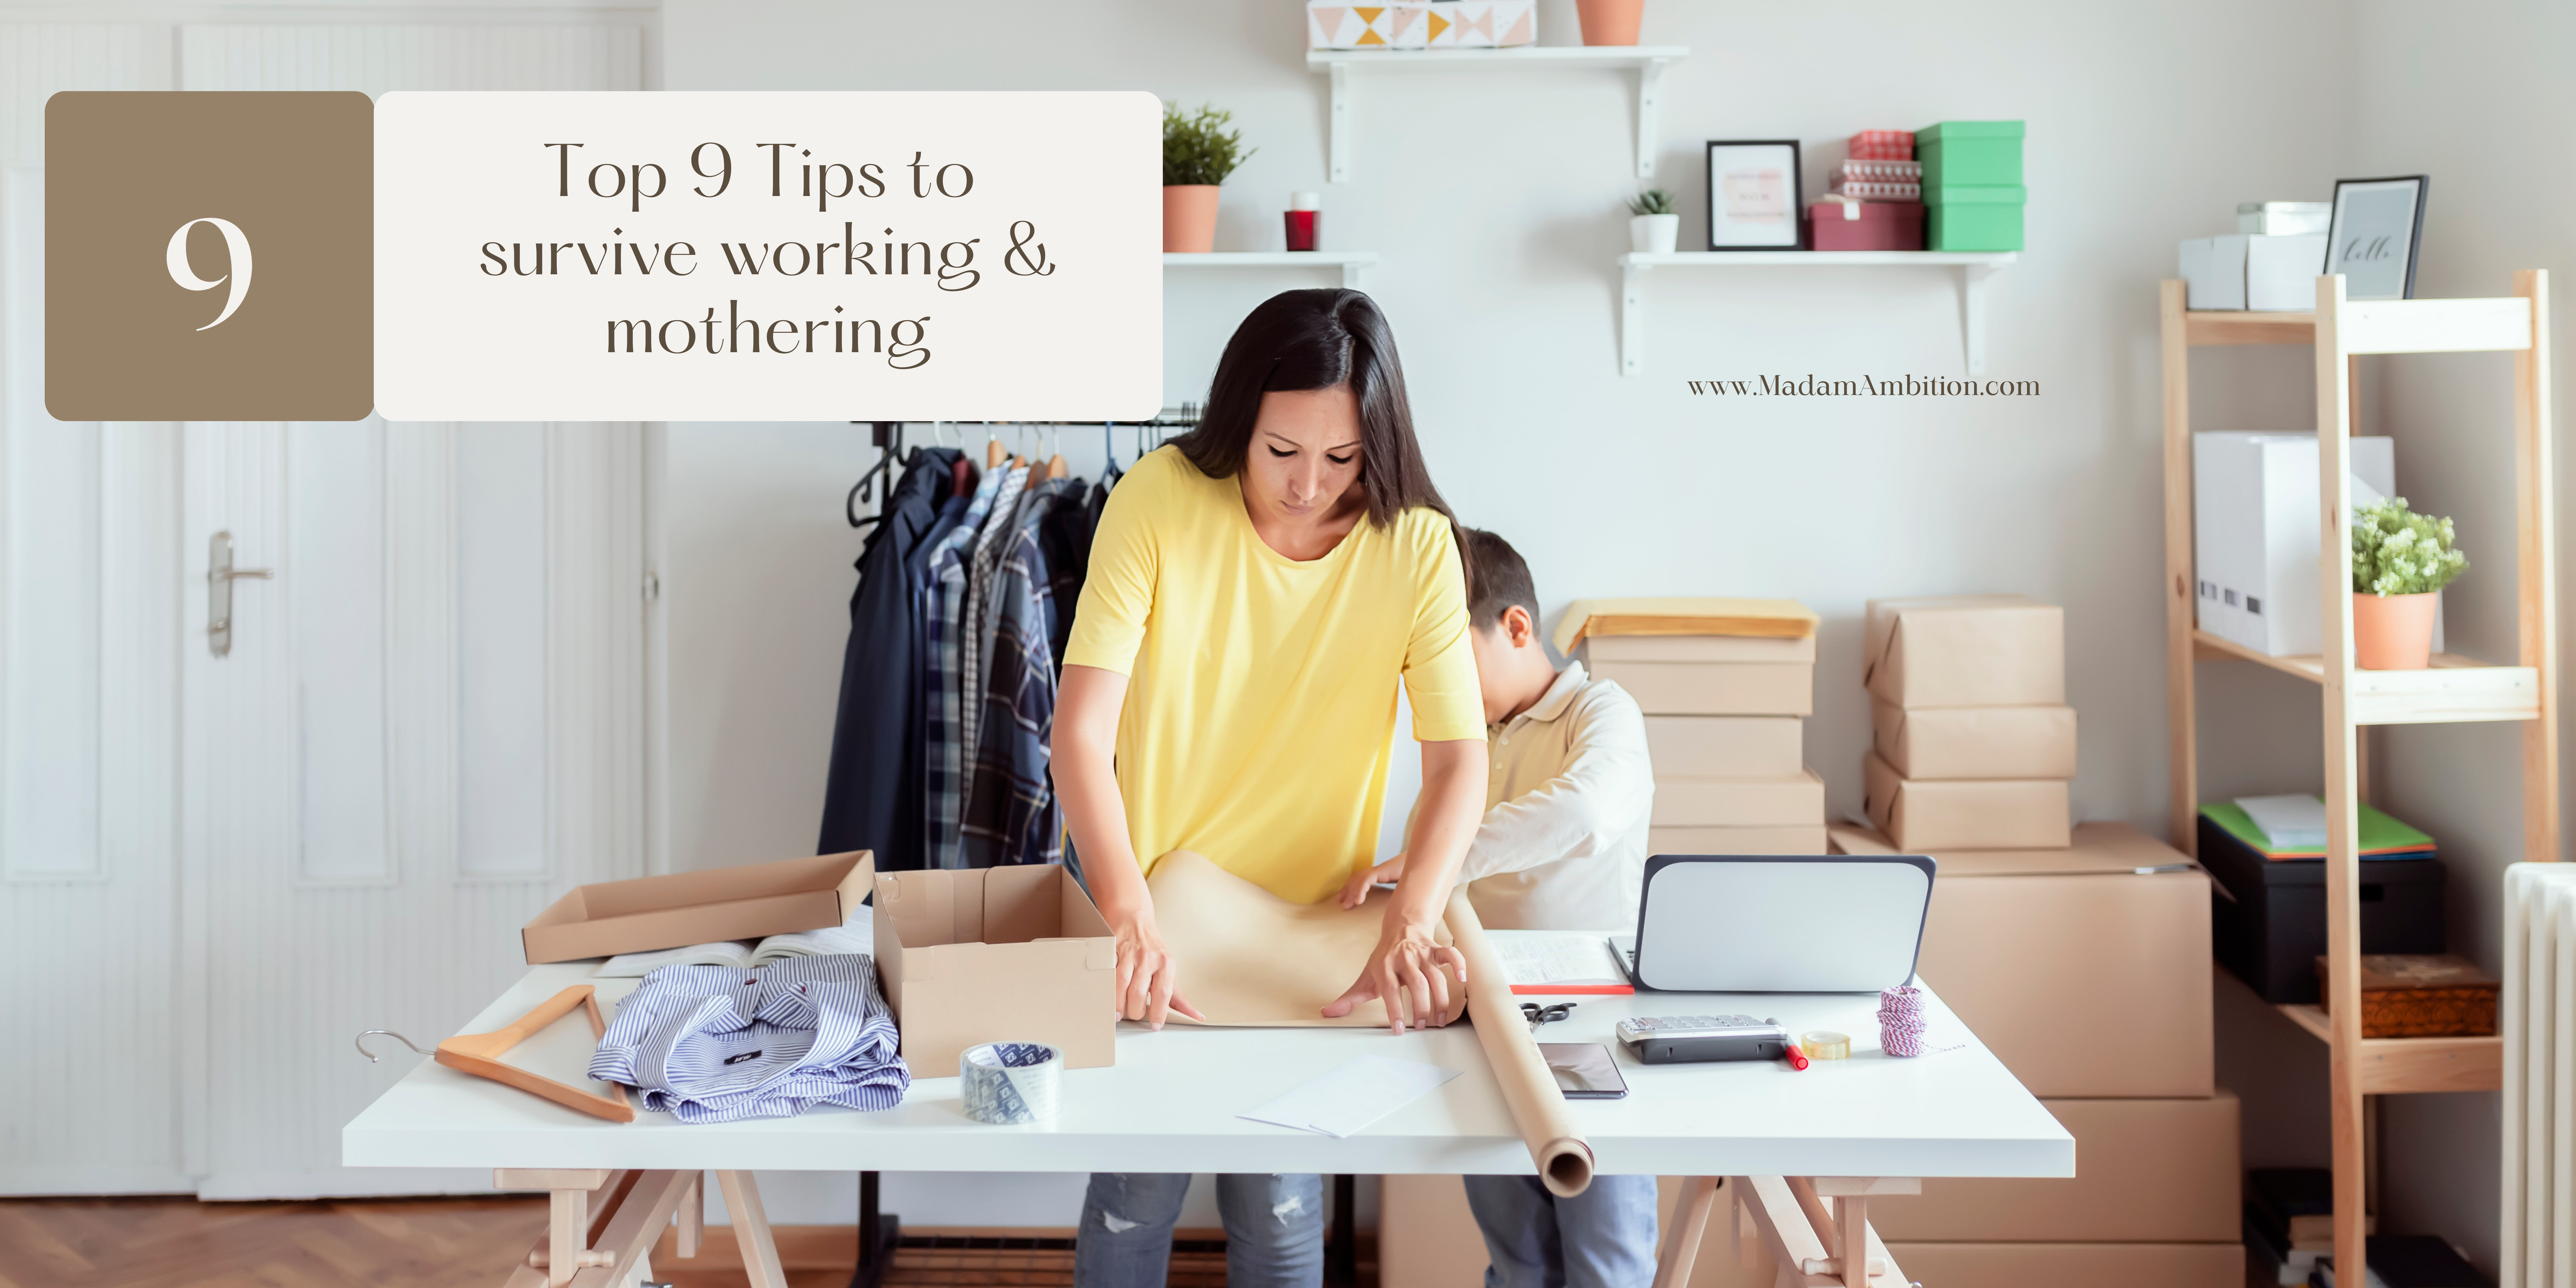 Top 9 tips for working mothers